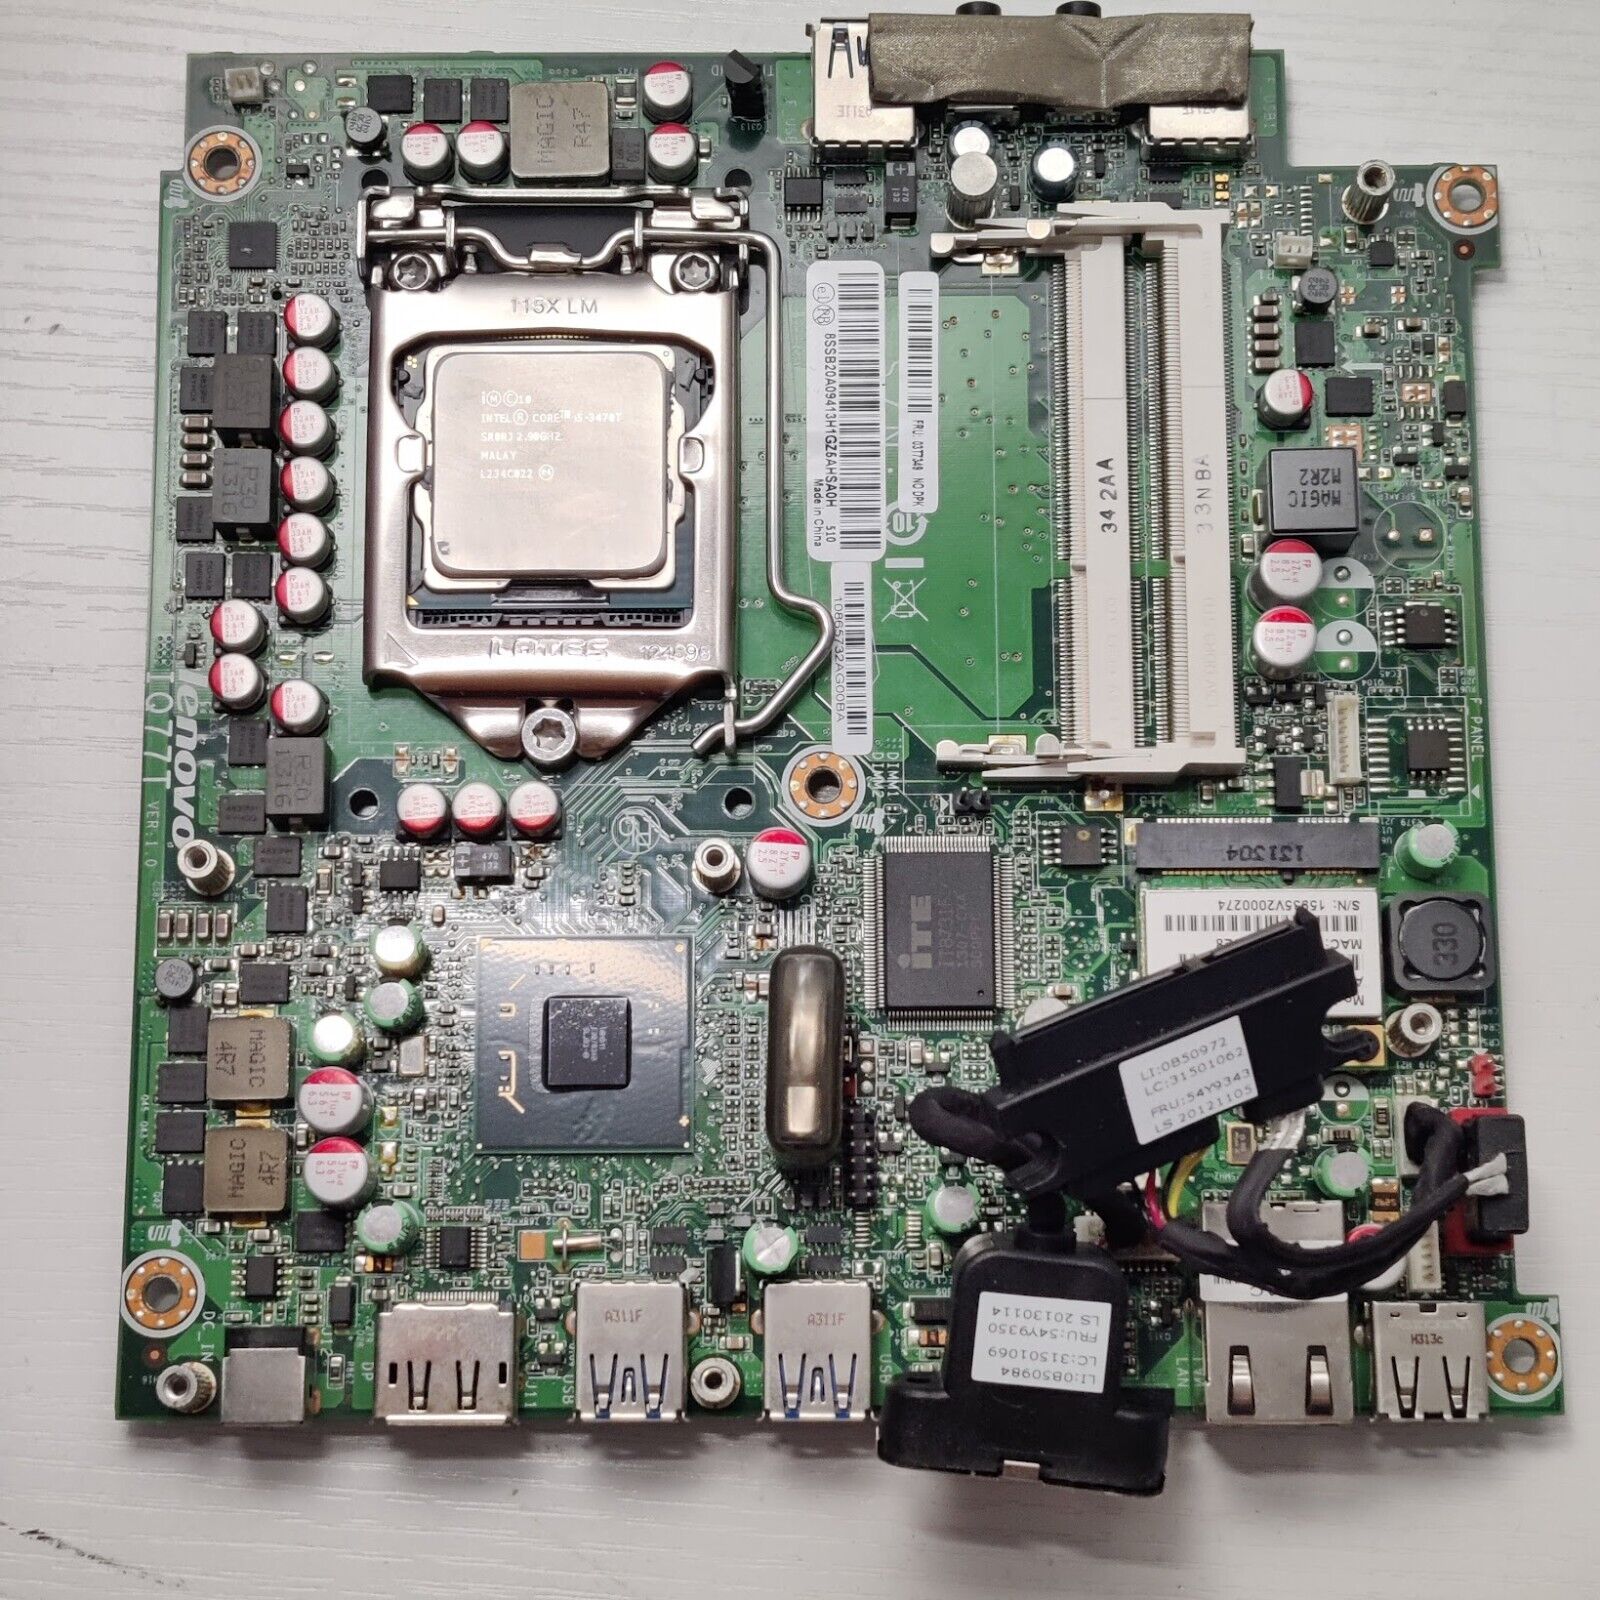 Lenovo ThinkCentre IQ77T MB Motherboard with Intel i5-3470T 2.9GHz